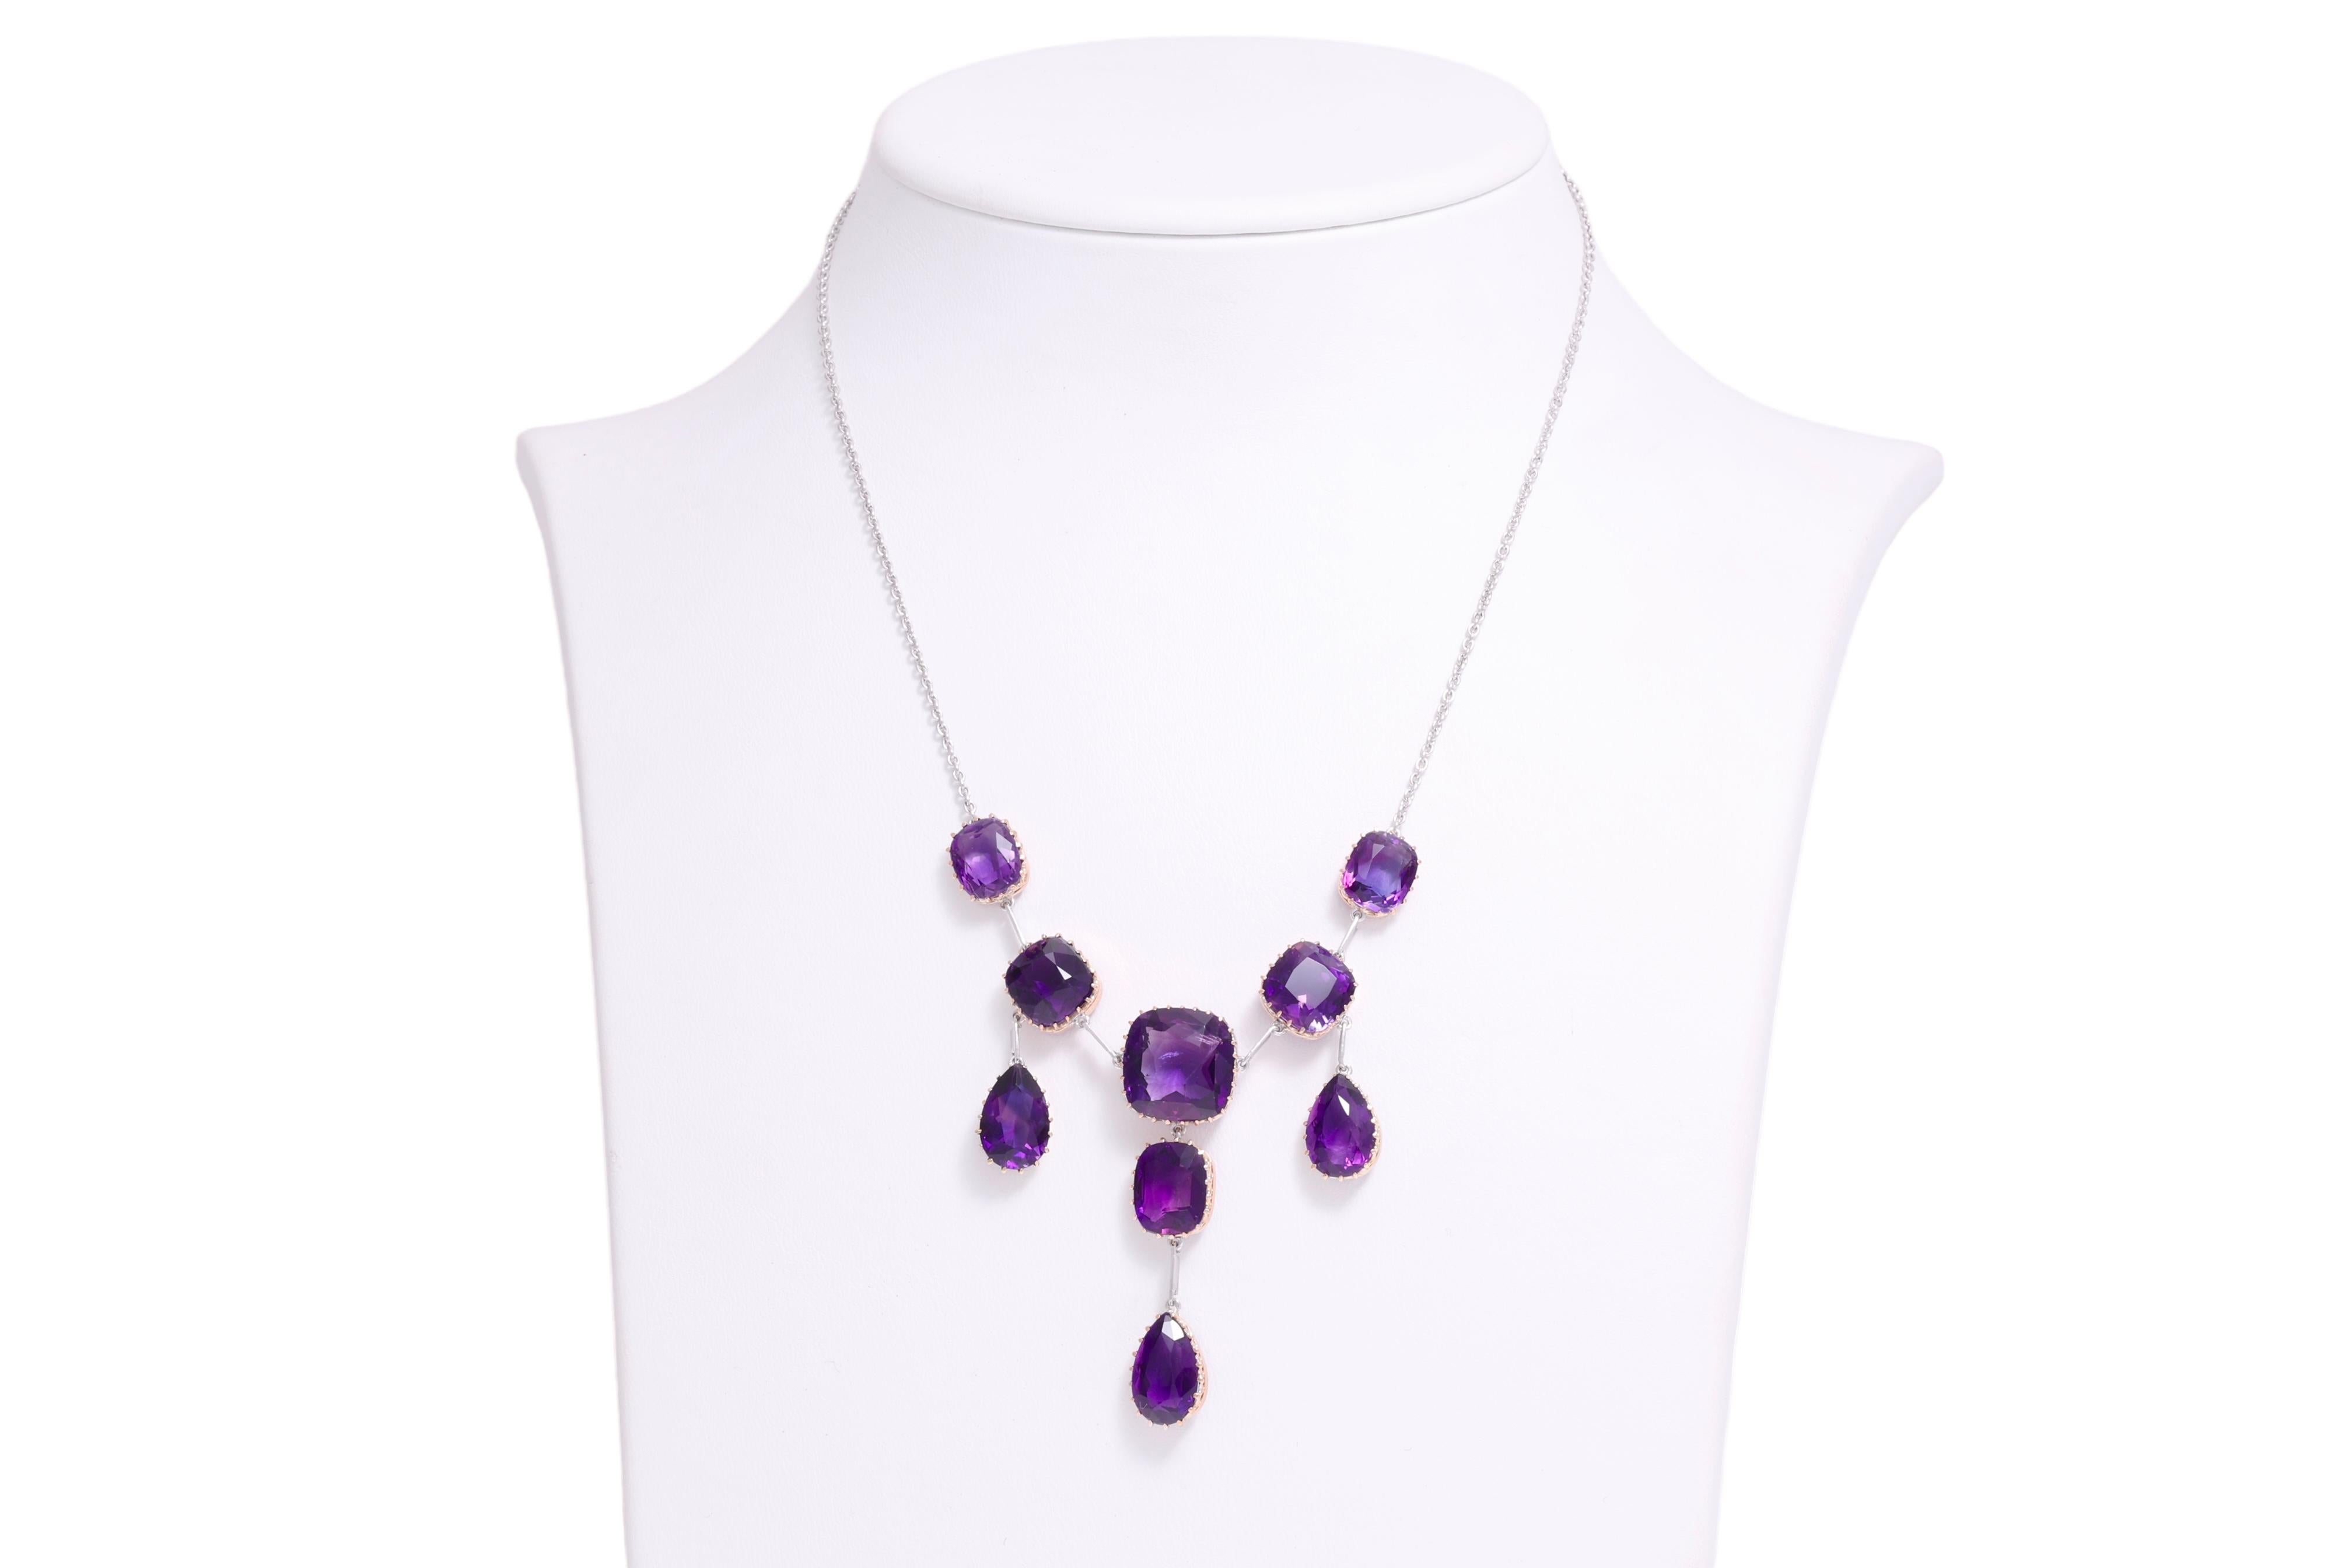 Gorgeous Chandelier Drop Necklace With 55 ct. Amethyst Gemstones

Amethyst: 9 Purple amethyst gemstones together approx. 55 ct.

Material: Platinum chain, 14 kt. Yellow gold pendant 

Measurements pendant: 80 mm x 47 mm
Necklace length: 42 cm

Total